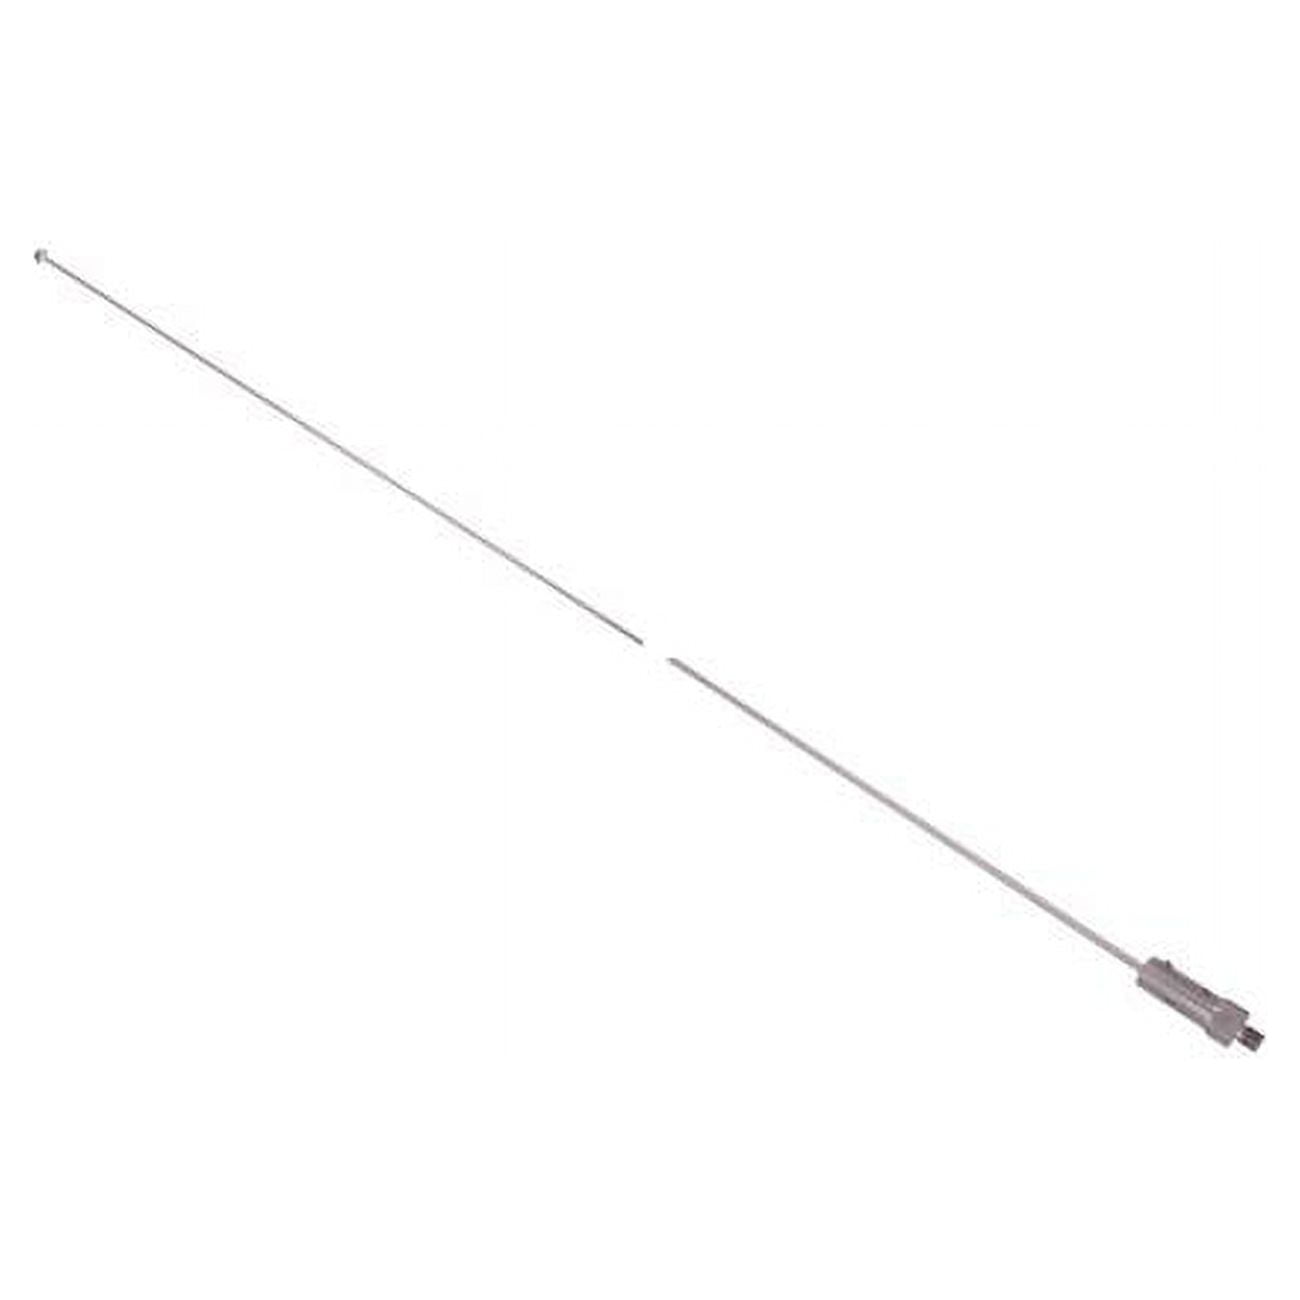 Picture of PCTEL-Maxrad MAR96F 97-0.62 in. & 0.35 x 24 in. Tall 30-54MHz Unity Gain Stainless Steel Whip with Threaded Base